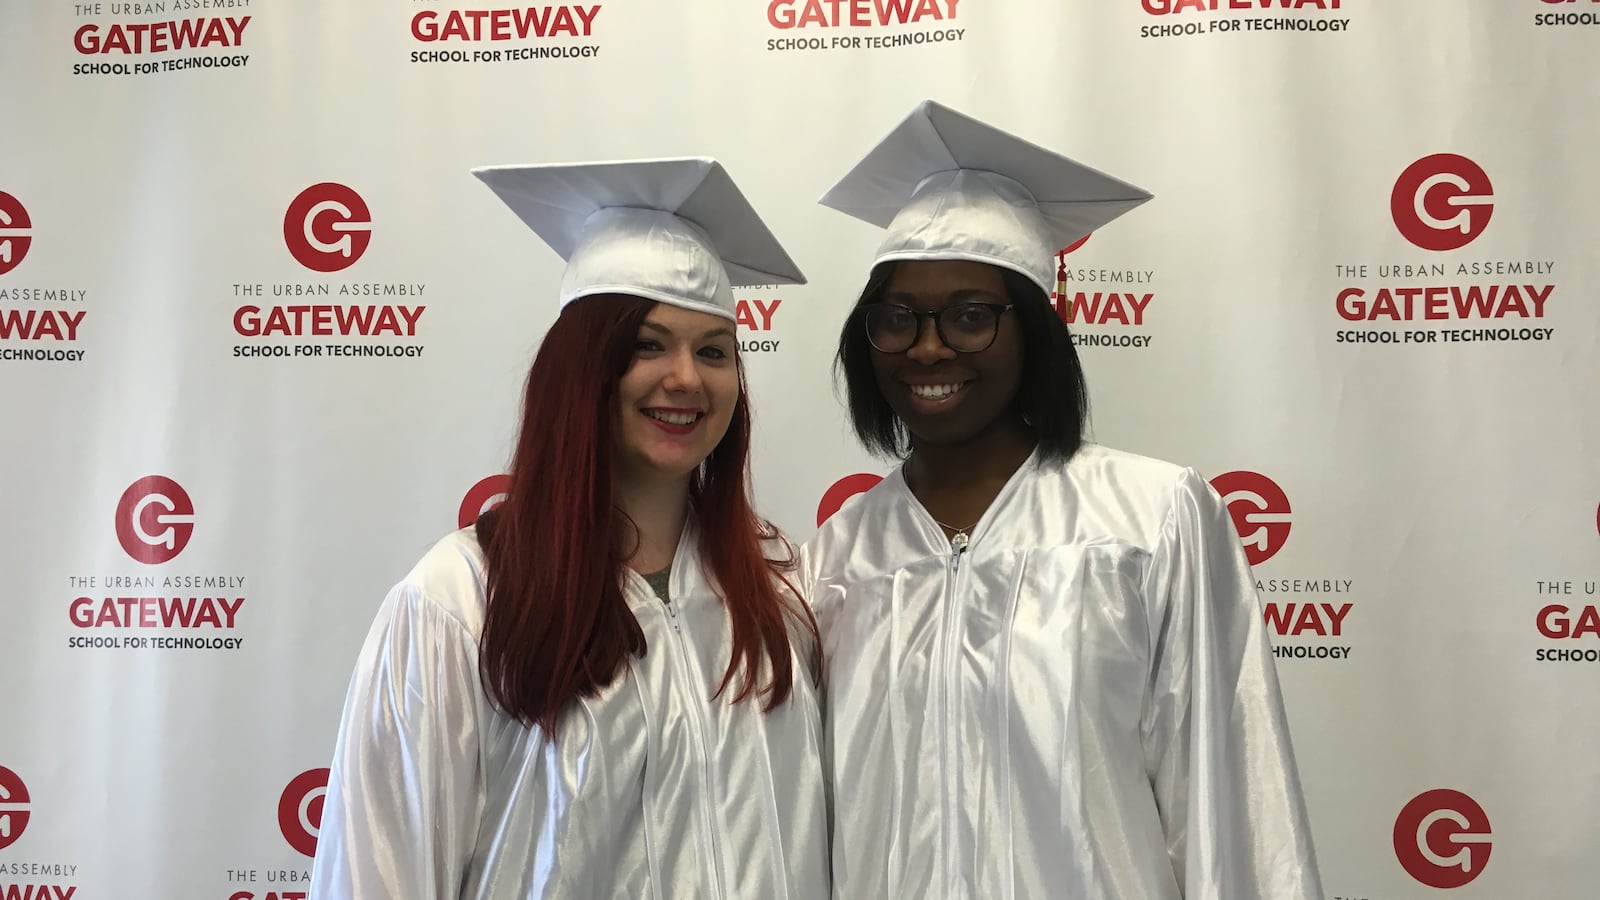 Leigh Duignan (left) and Dorothy Slater (right) immediately before graduation.